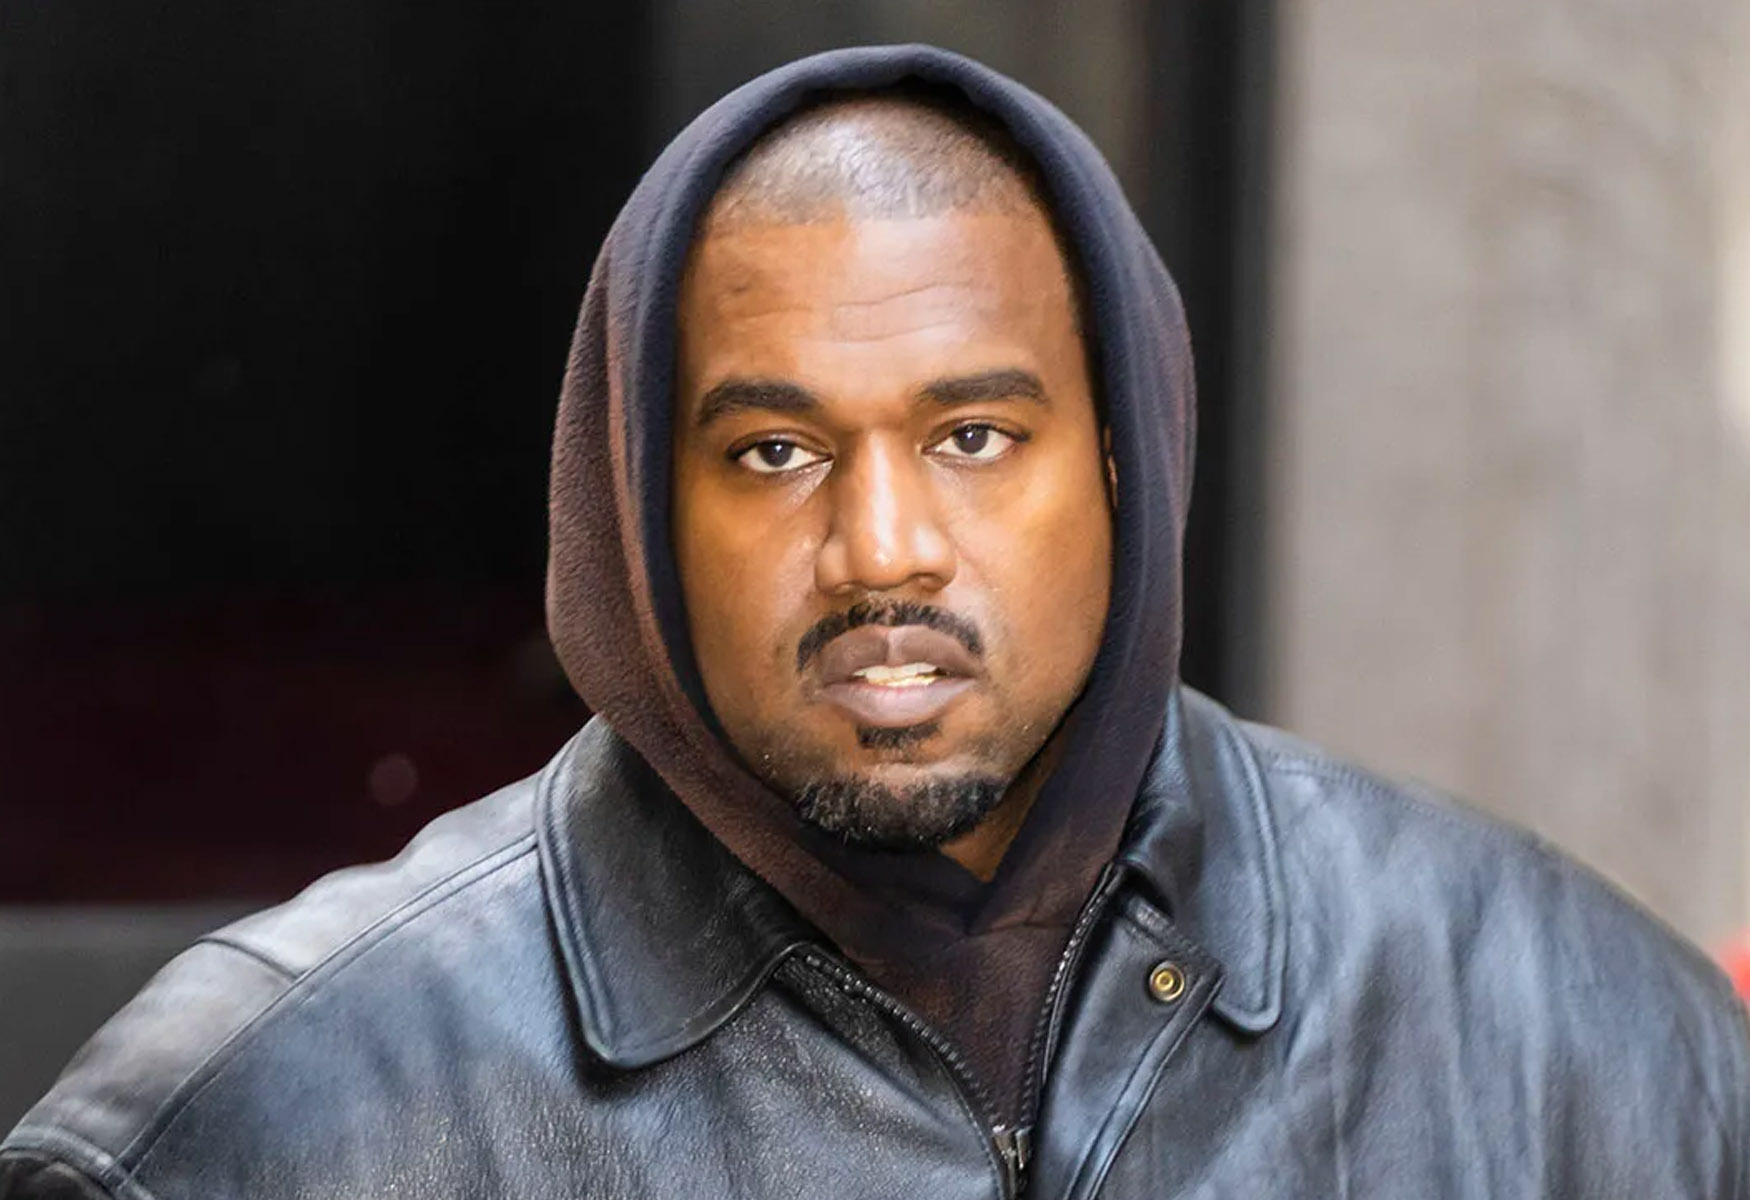 kanye-west-sparks-controversy-with-kkk-style-black-hood-at-vultures-album-listening-party